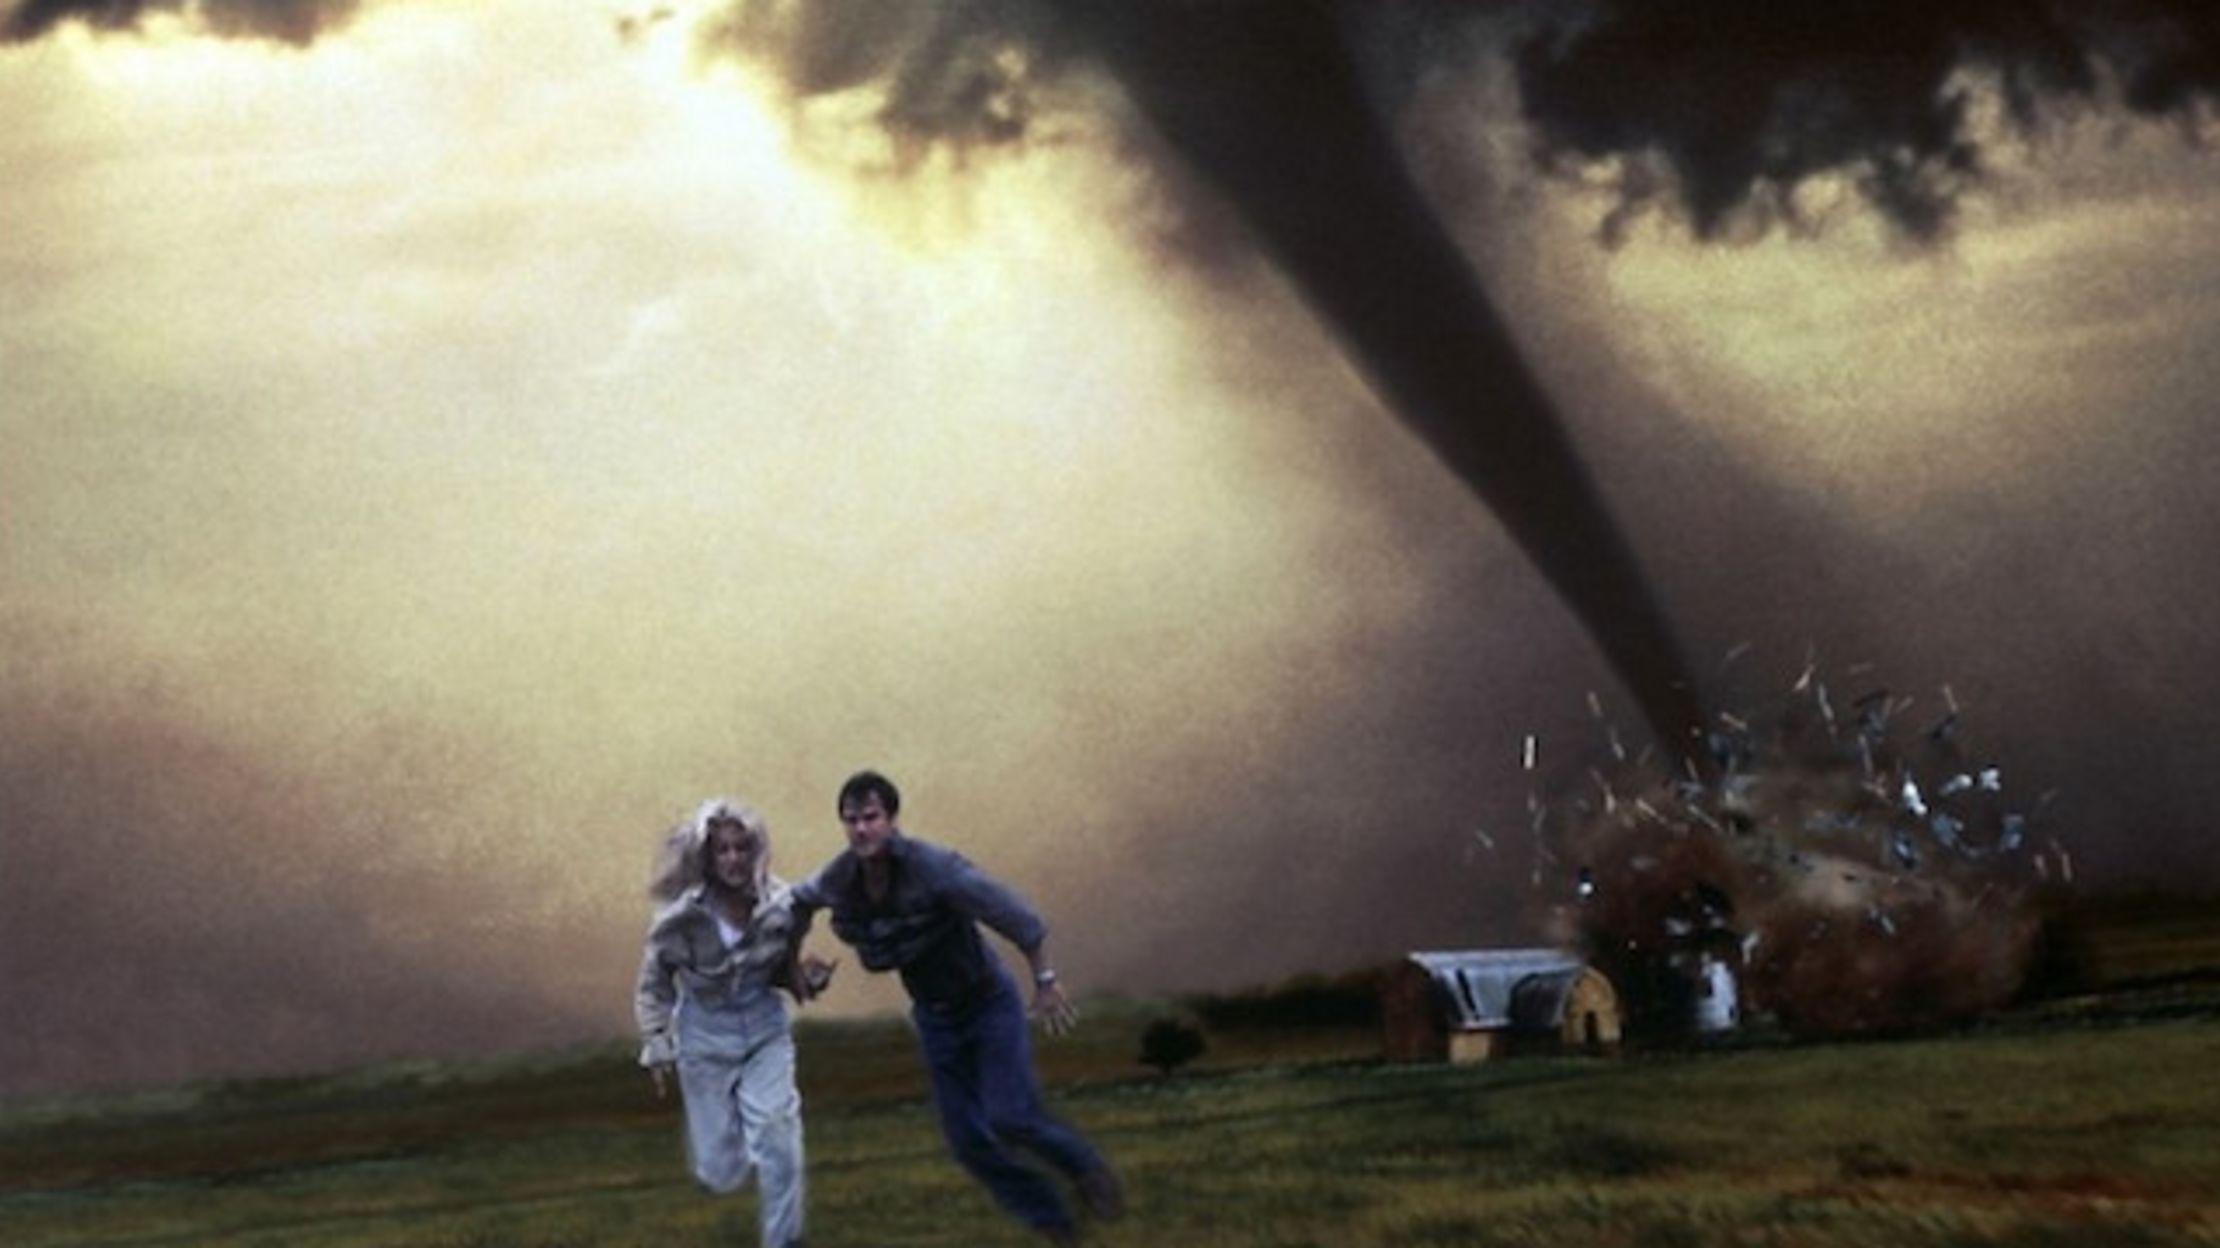 Where Was Twister Filmed?